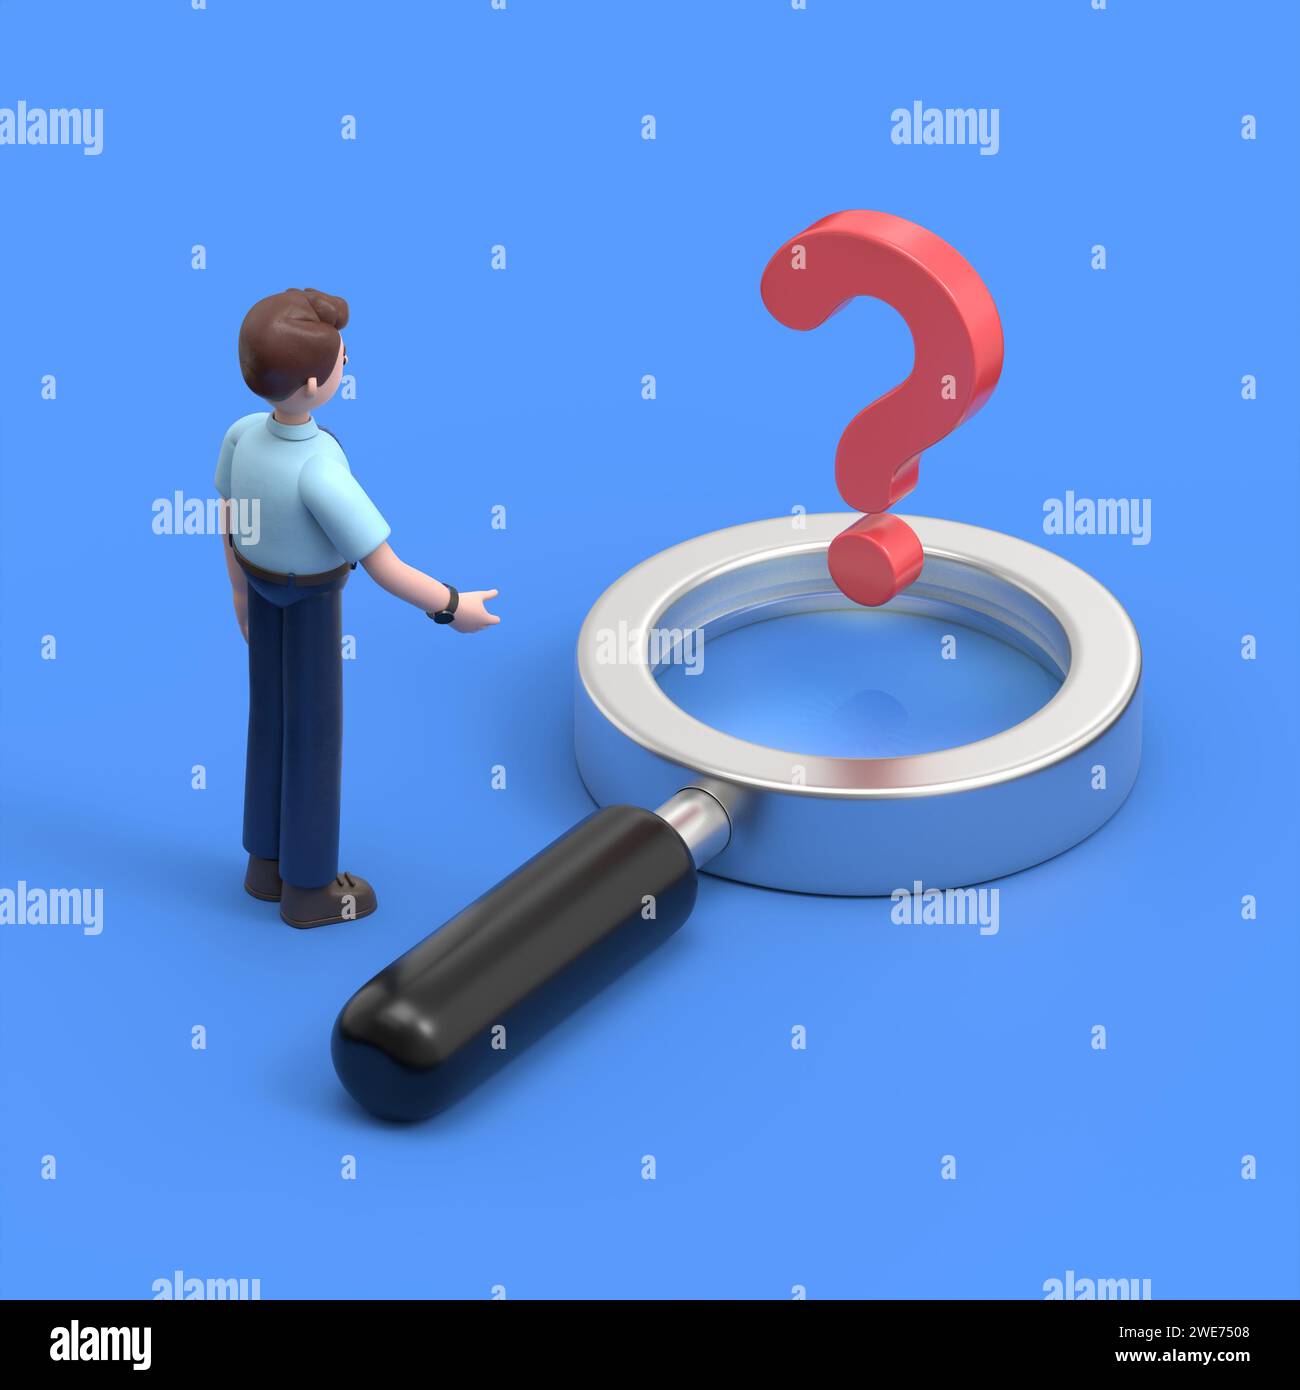 isometric 3D illustration on a blue background,3D illustration of Asian man Felix stands in front of a question mark in a magnifying glass, looking fo Stock Photo